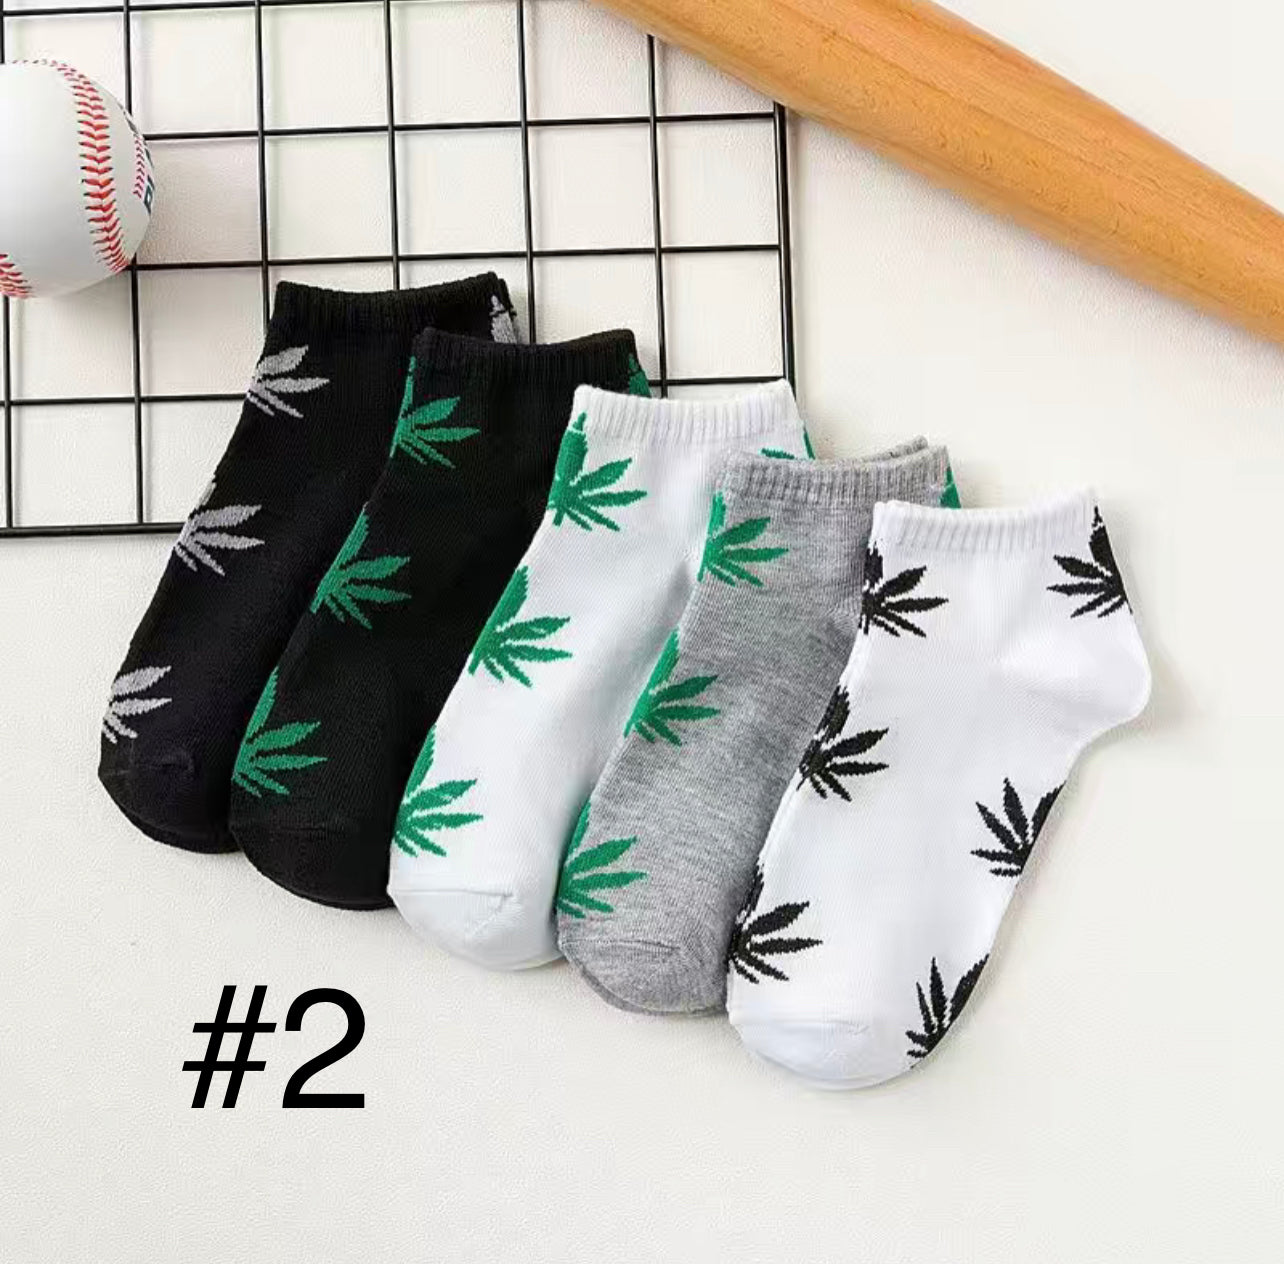 Trio of 420-themed ankle socks in various designs for sizes 6-10